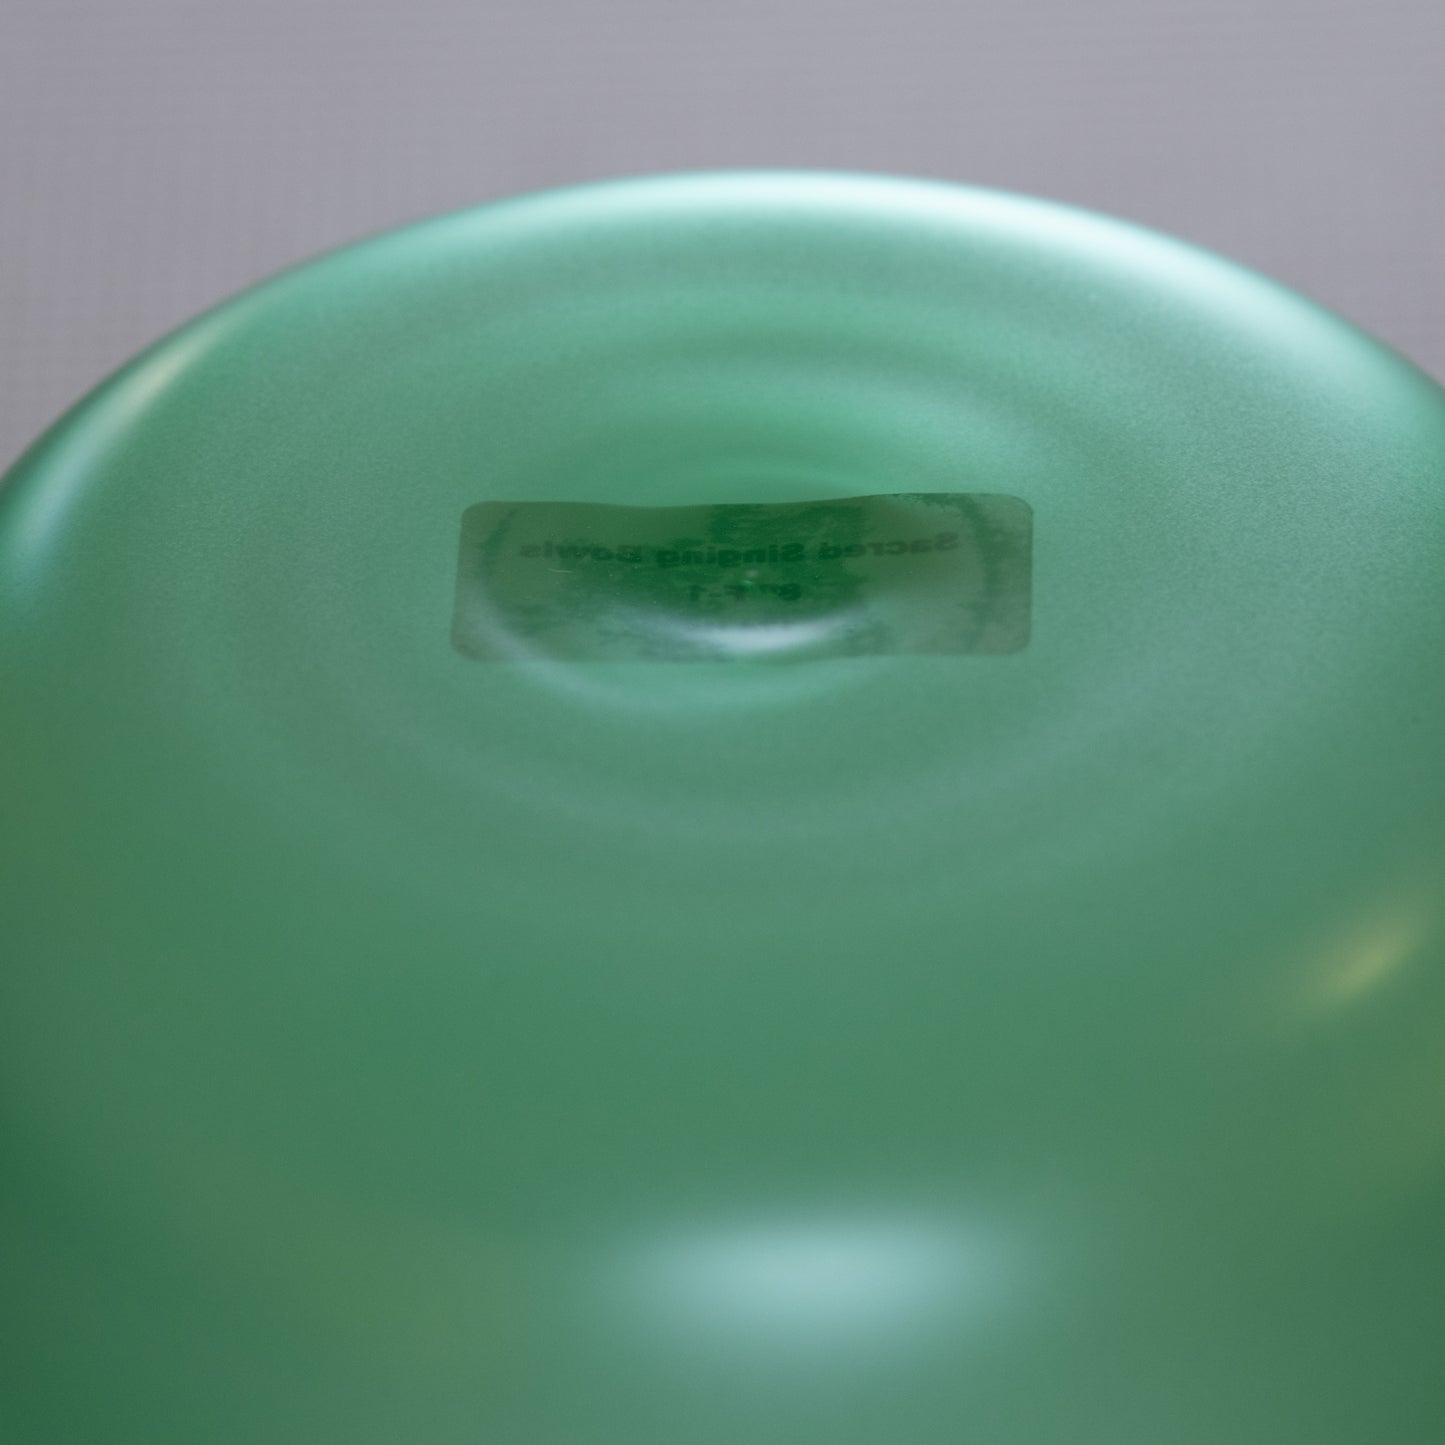 8" F-1 Emerald Green Color Crystal Singing Bowl, Lightly Frosted Outside, Perfect Pitch, Sacred Singing Bowls